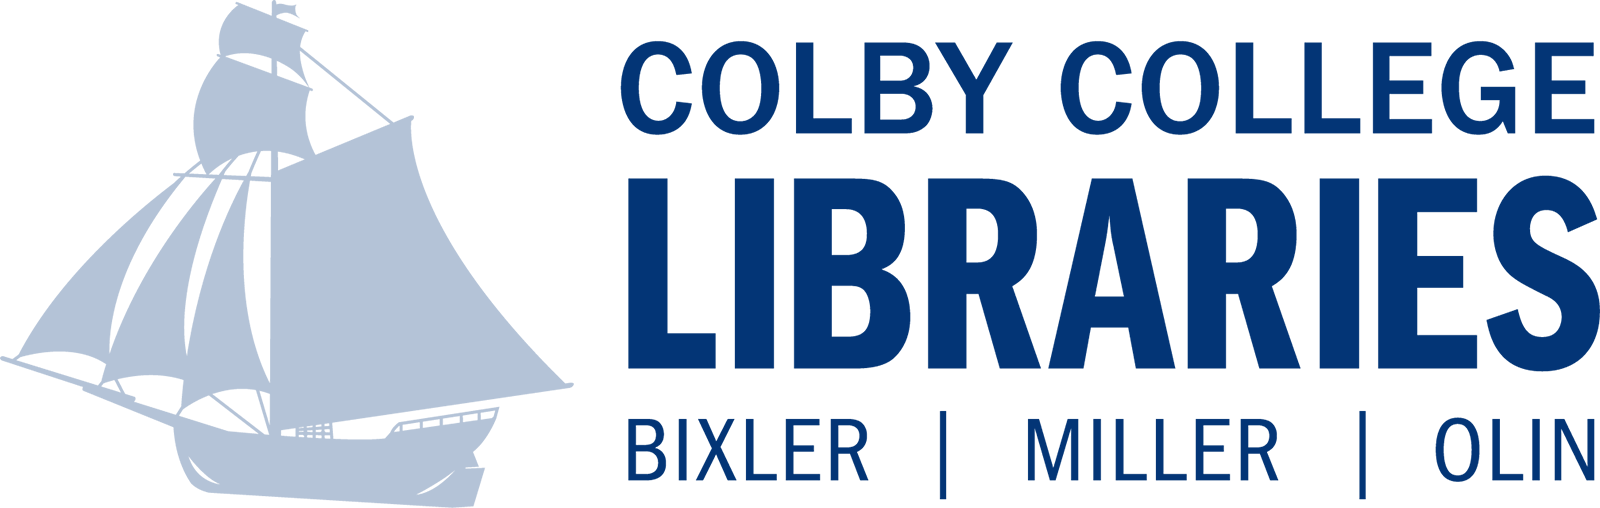 Colby College Logo - Colby College Libraries